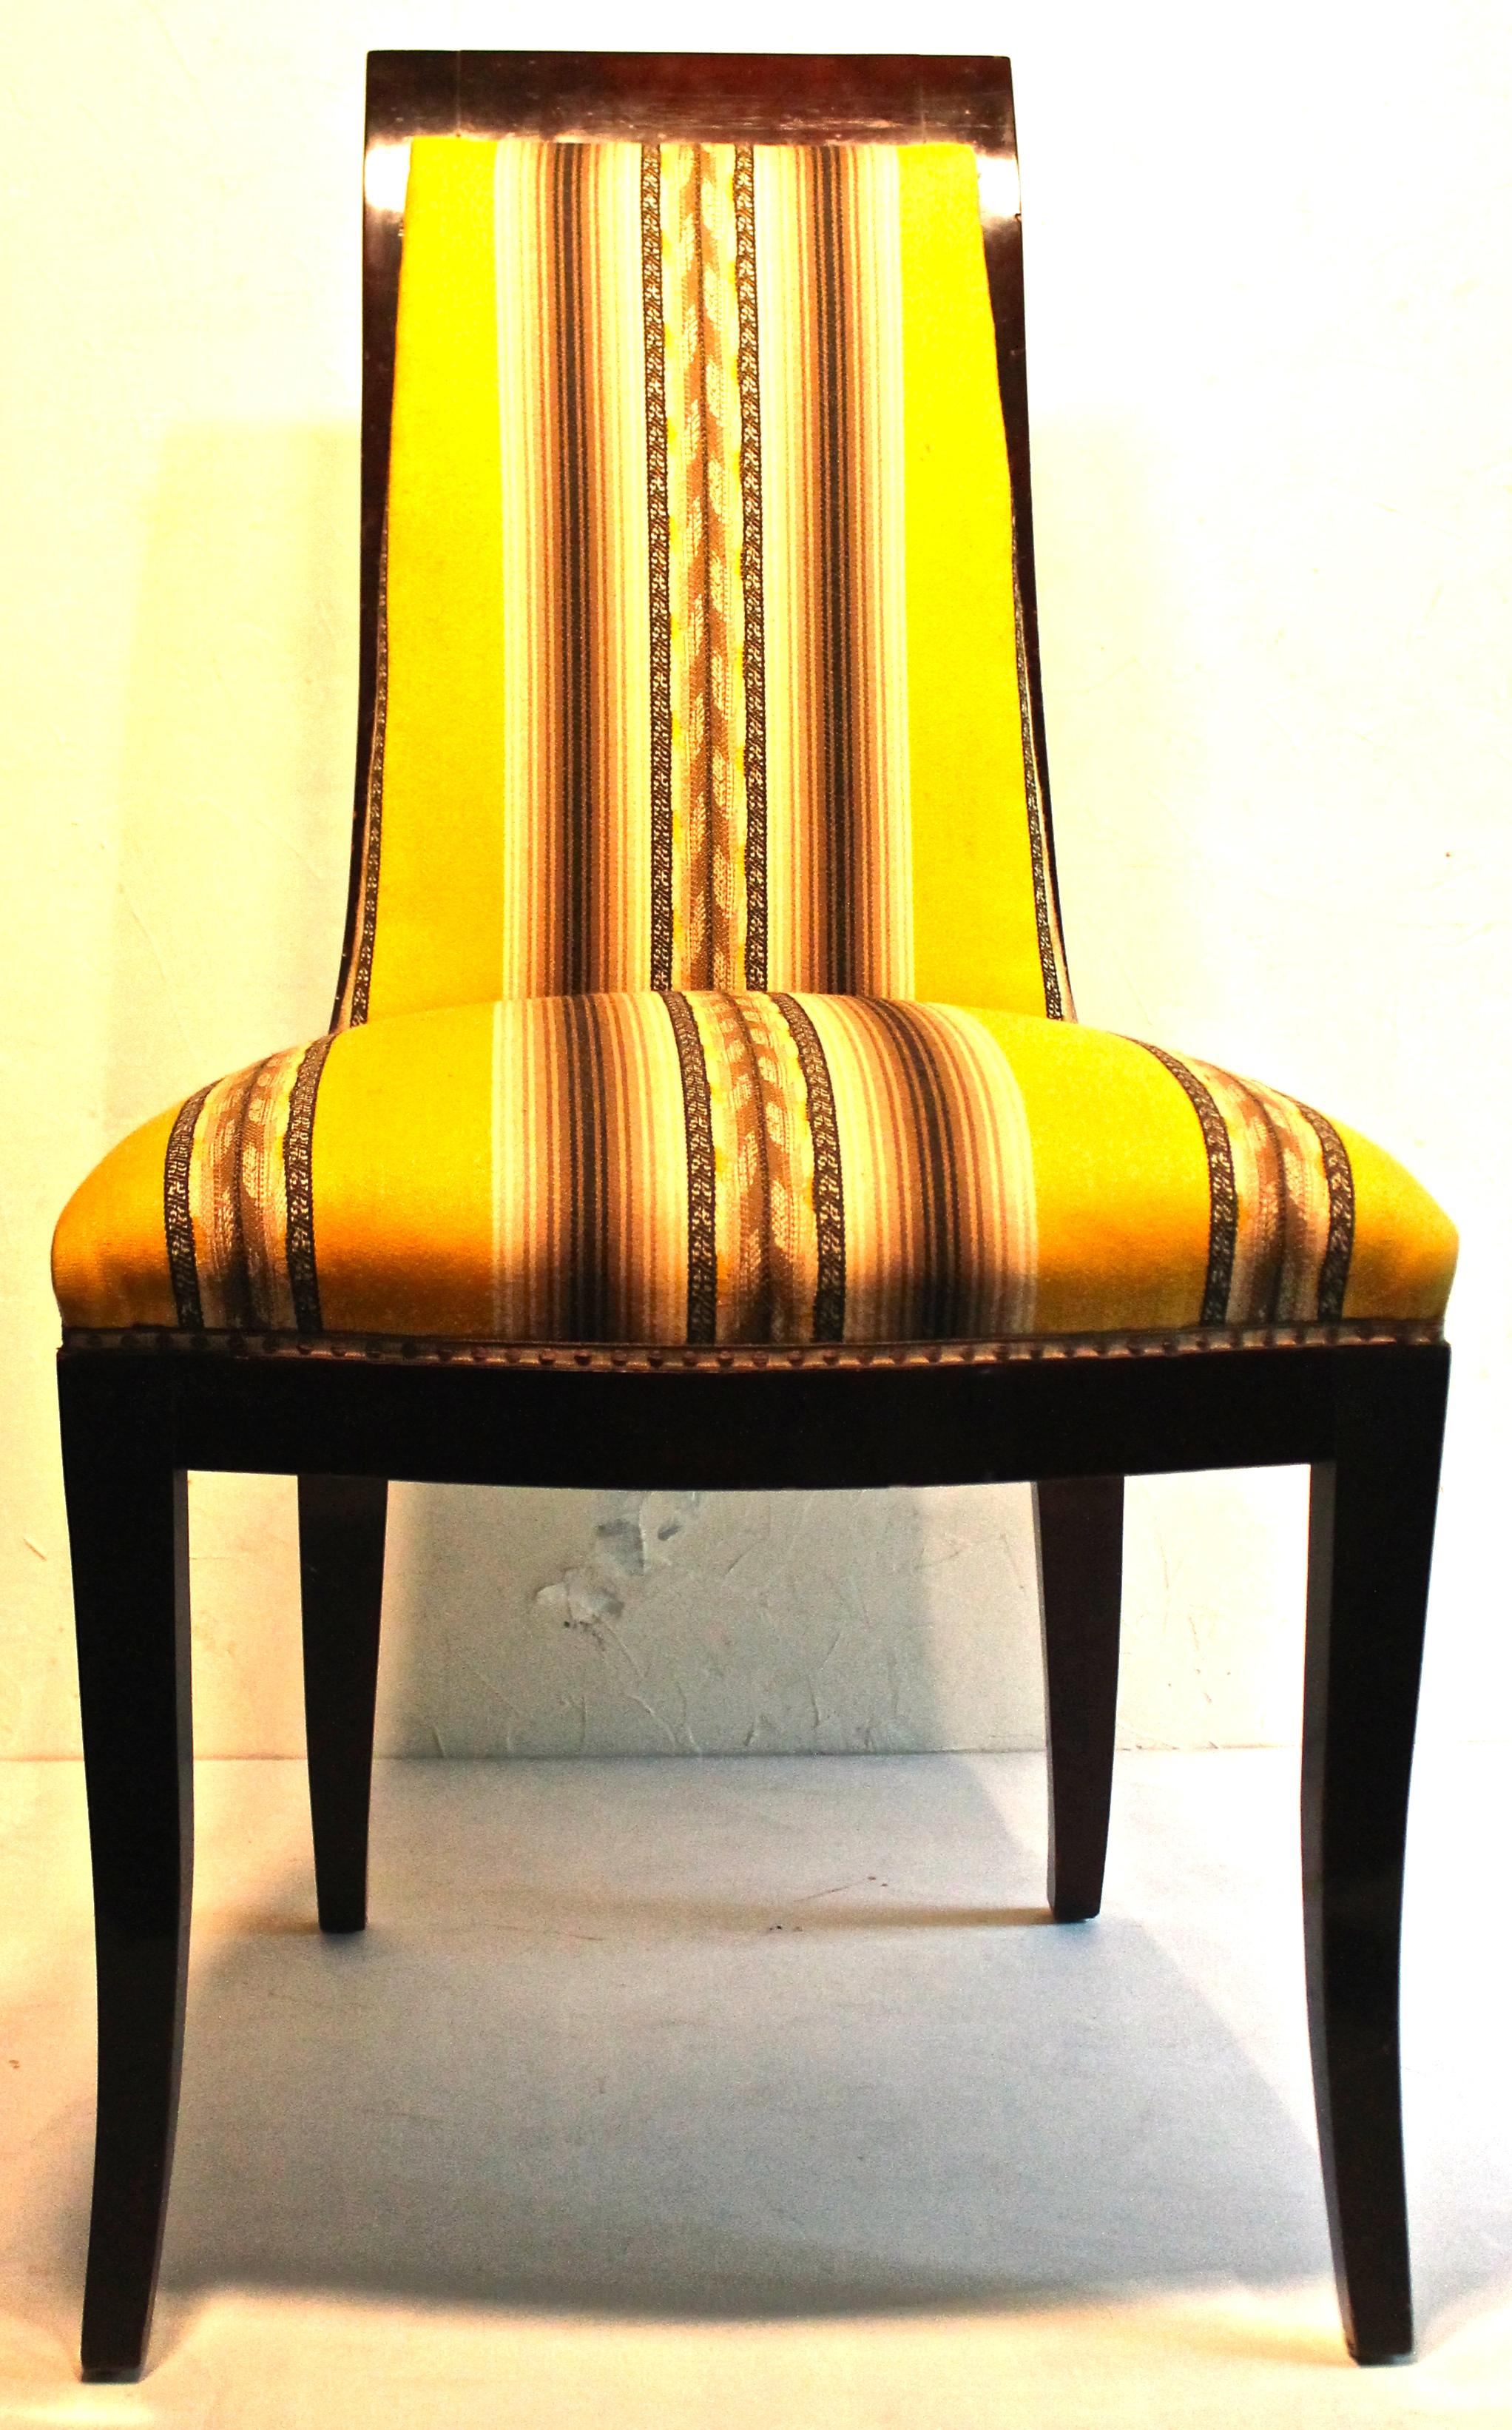 Extraordinary deco side chair with a high finish dark lacquer, appropriately upholstered in a striking yellow and black fabric.